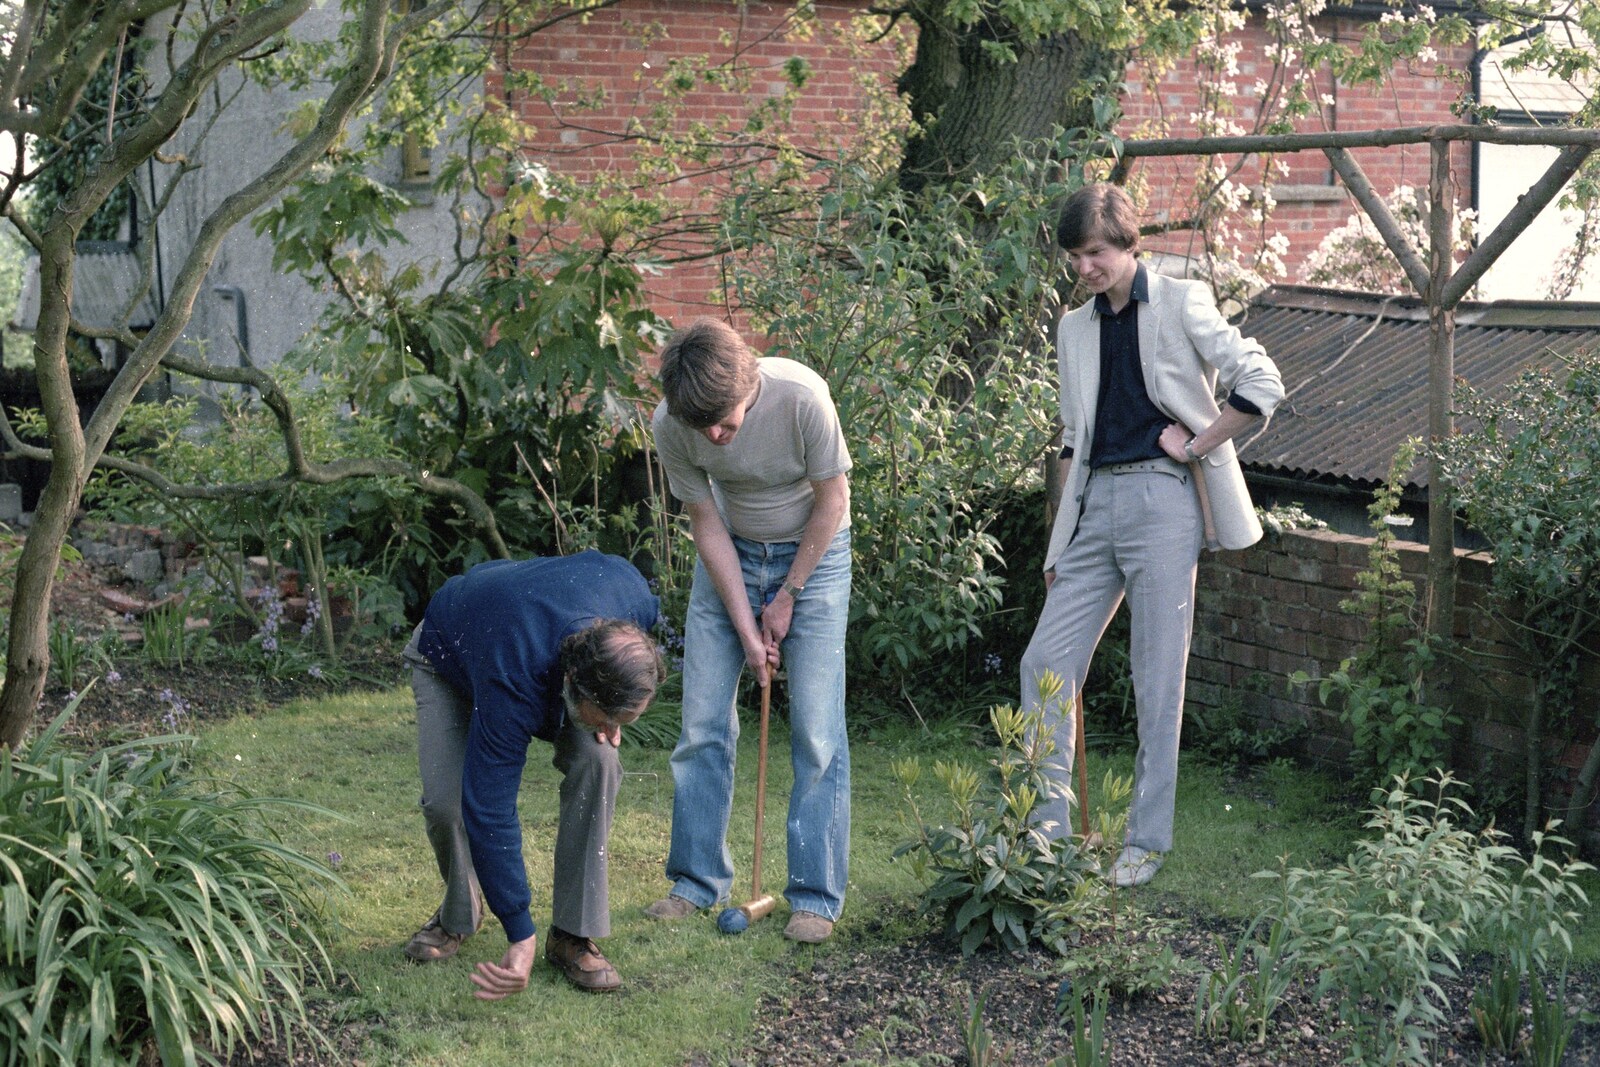 Nosher's 18th Birthday, Barton on Sea, Hampshire - 26th May 1985: Andy clears some grass out of the way for Neil's shot